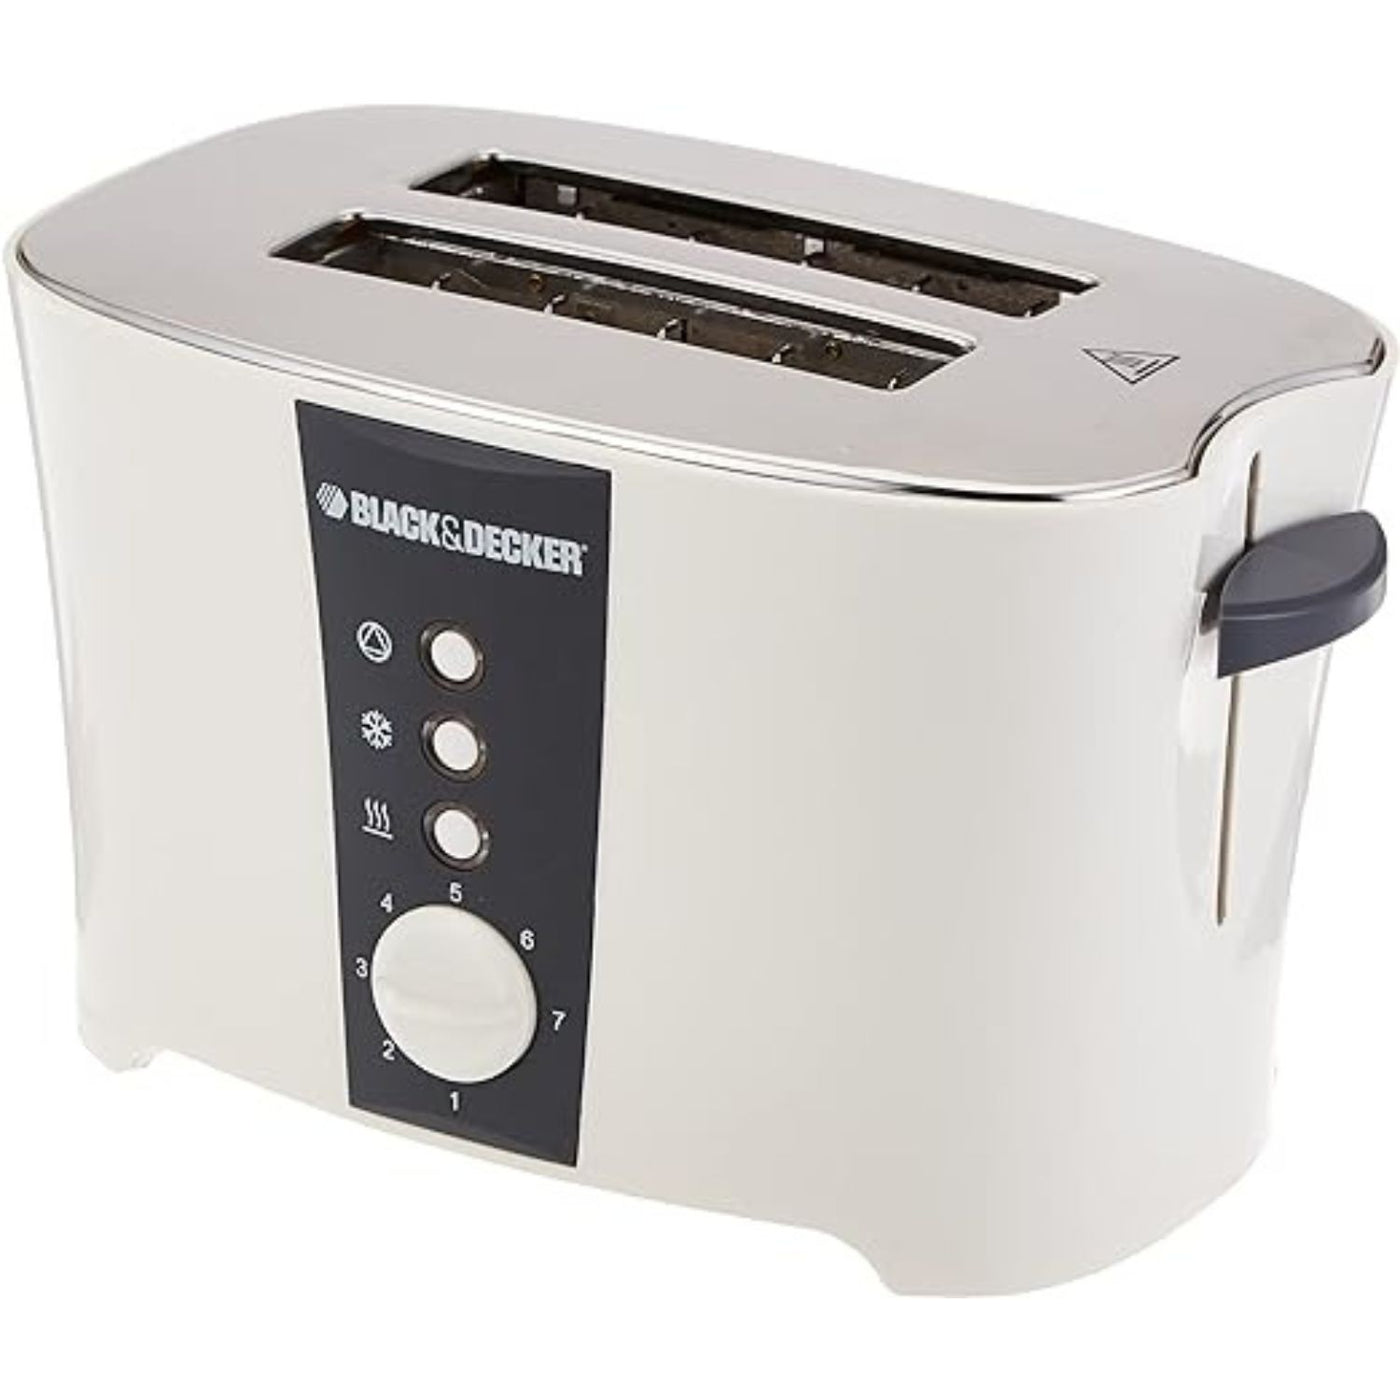 2 Slice Cool Touch Toaster with Crumb Tray for Easy Cleaning